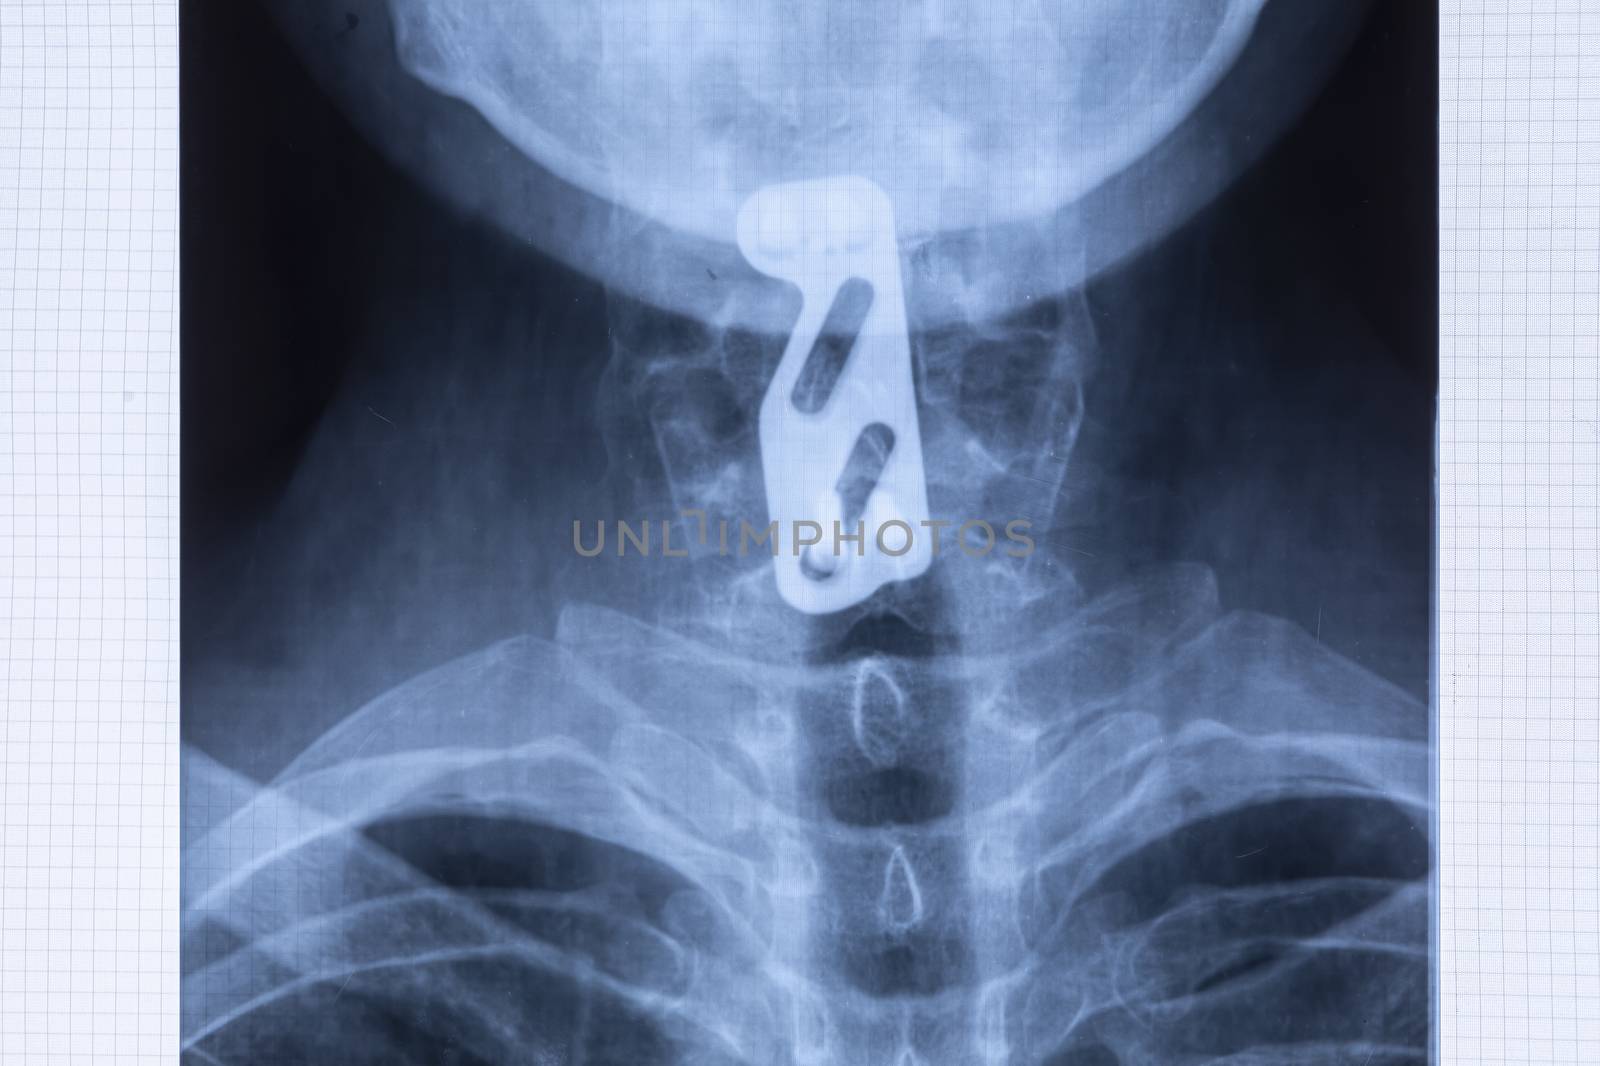 Radiography of titanium plate to support the cervical spine by manaemedia